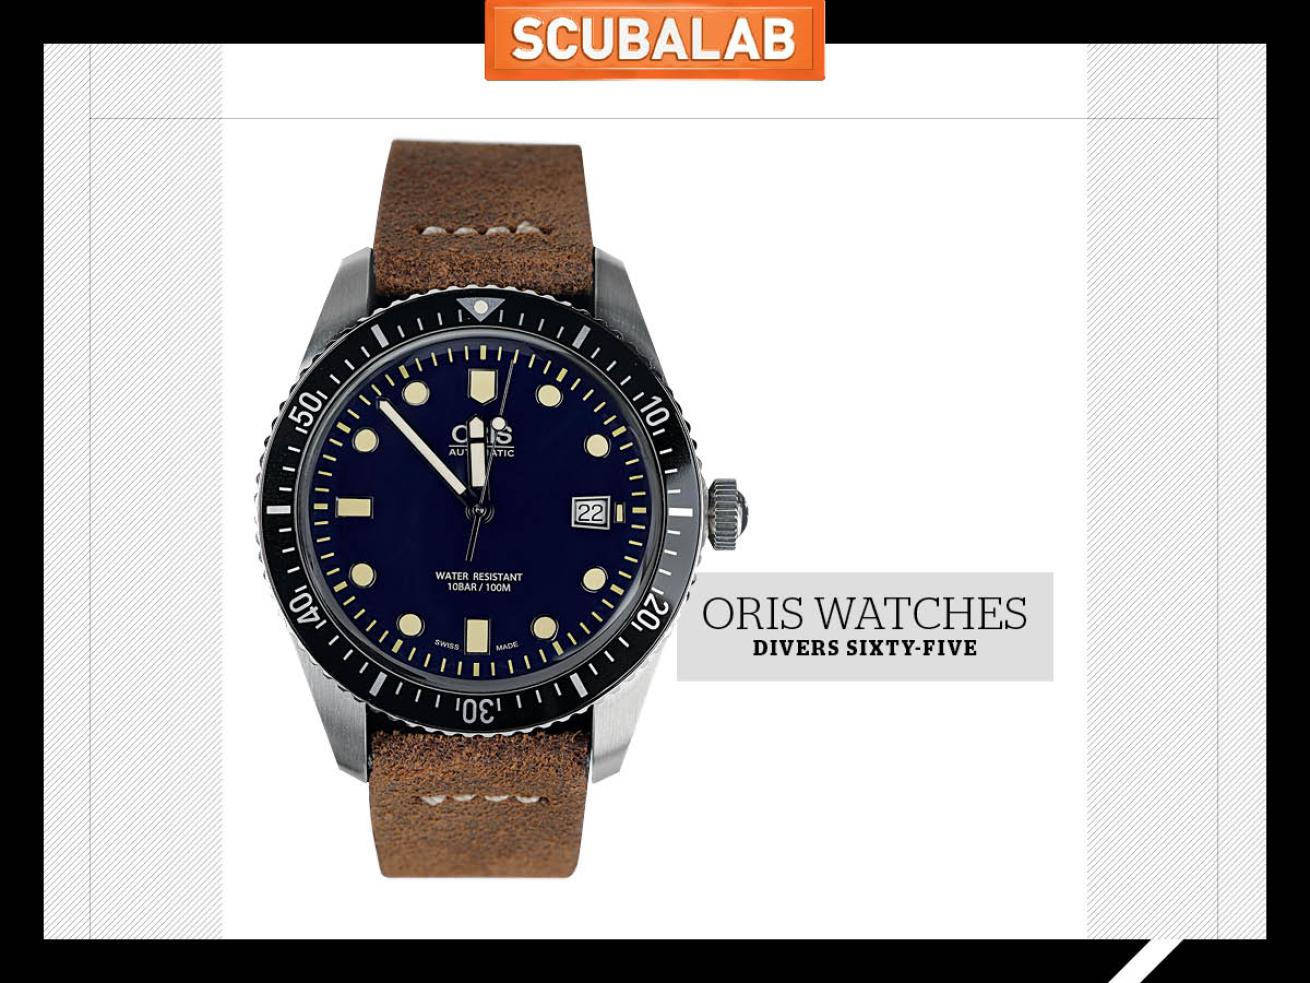 Oris Watches Divers Sixty-Five dive watch